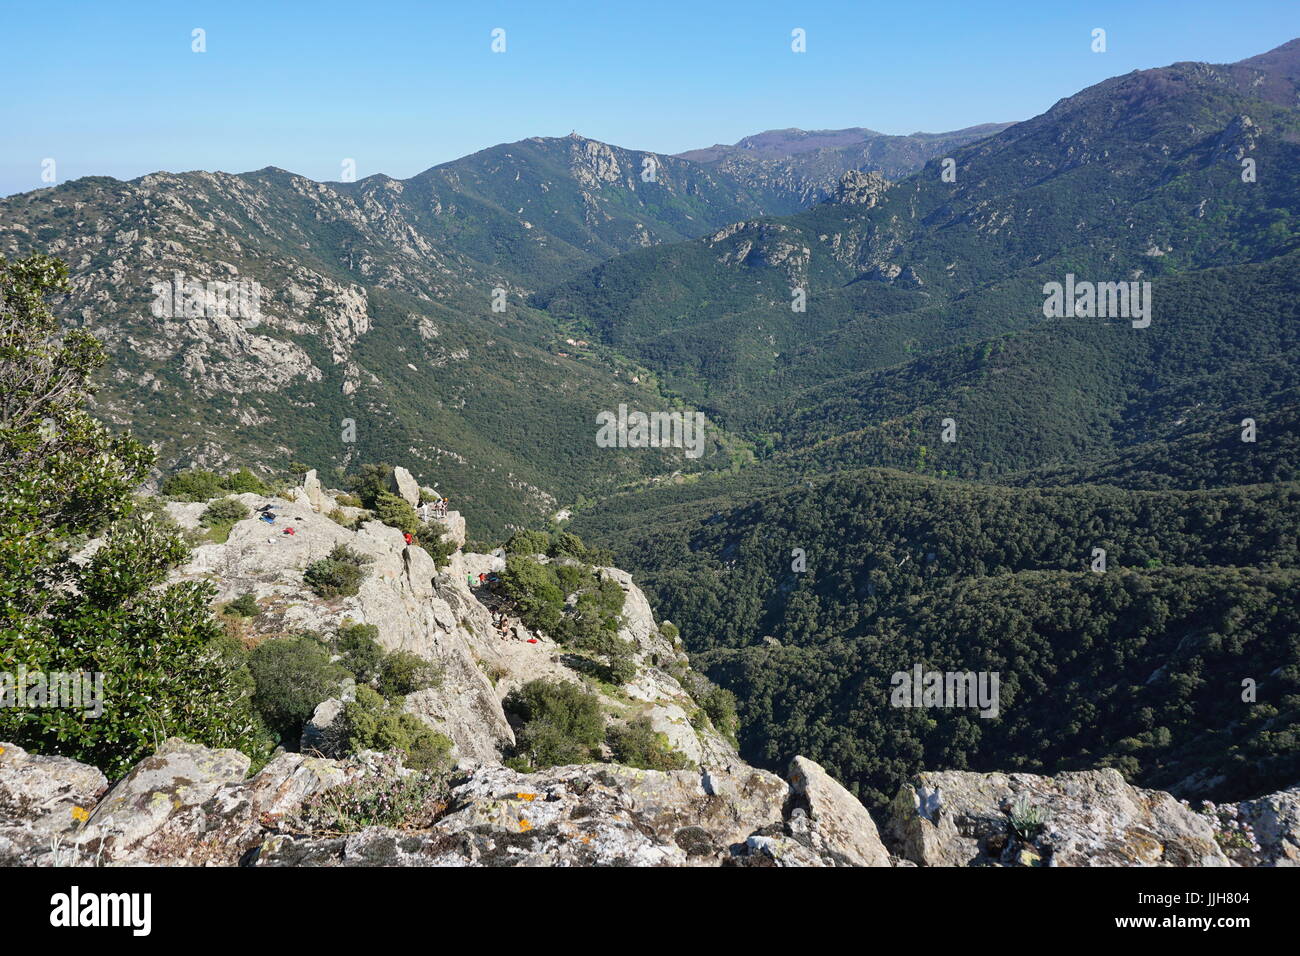 The valley of Lavail in the Pyrenees Orientales, massif des Alberes, Sorede, Roussillon, south of France Stock Photo